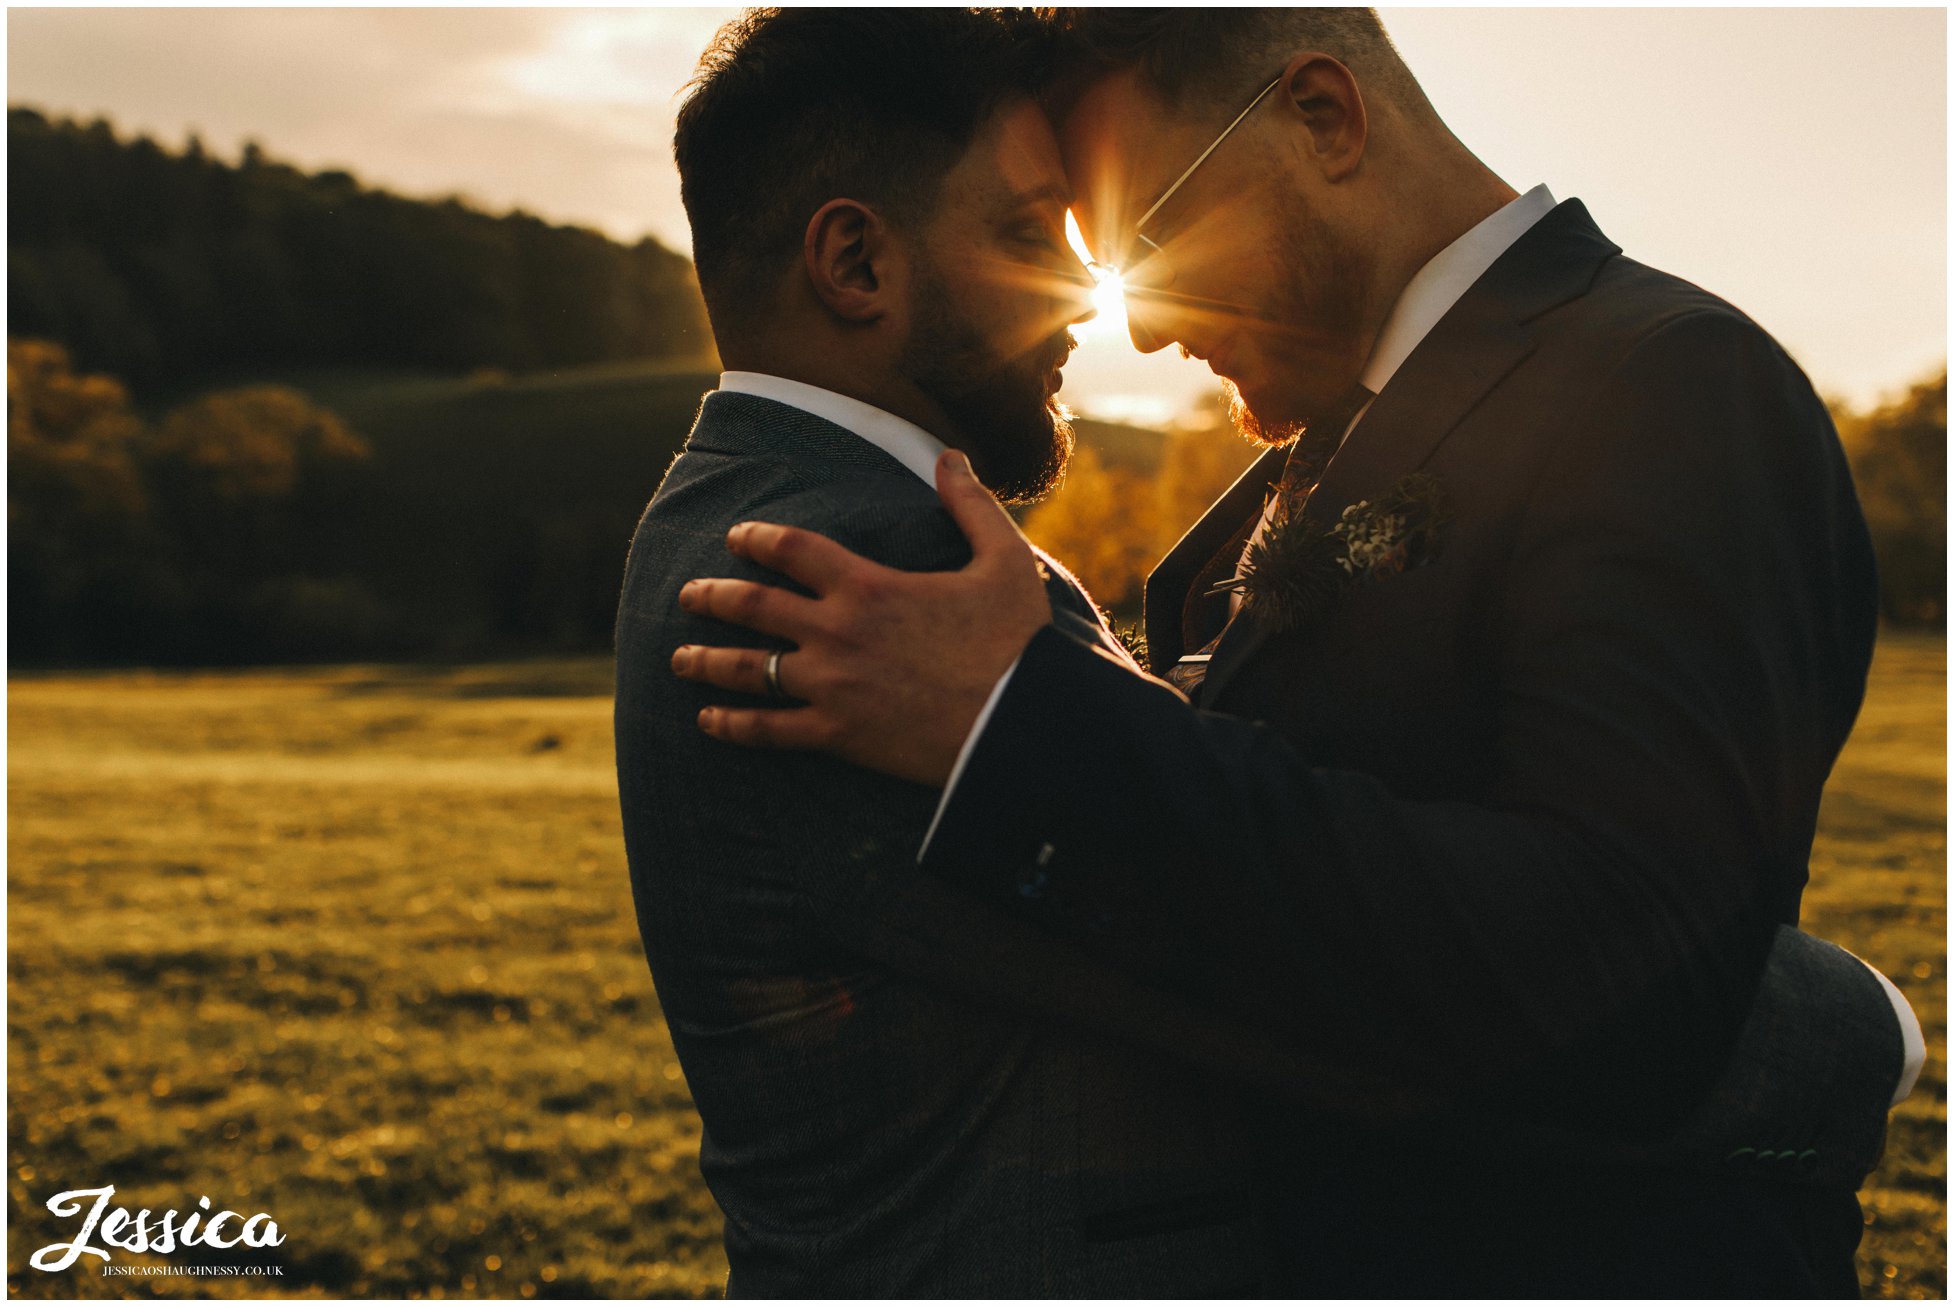 the grooms hold each other in the golden evening light